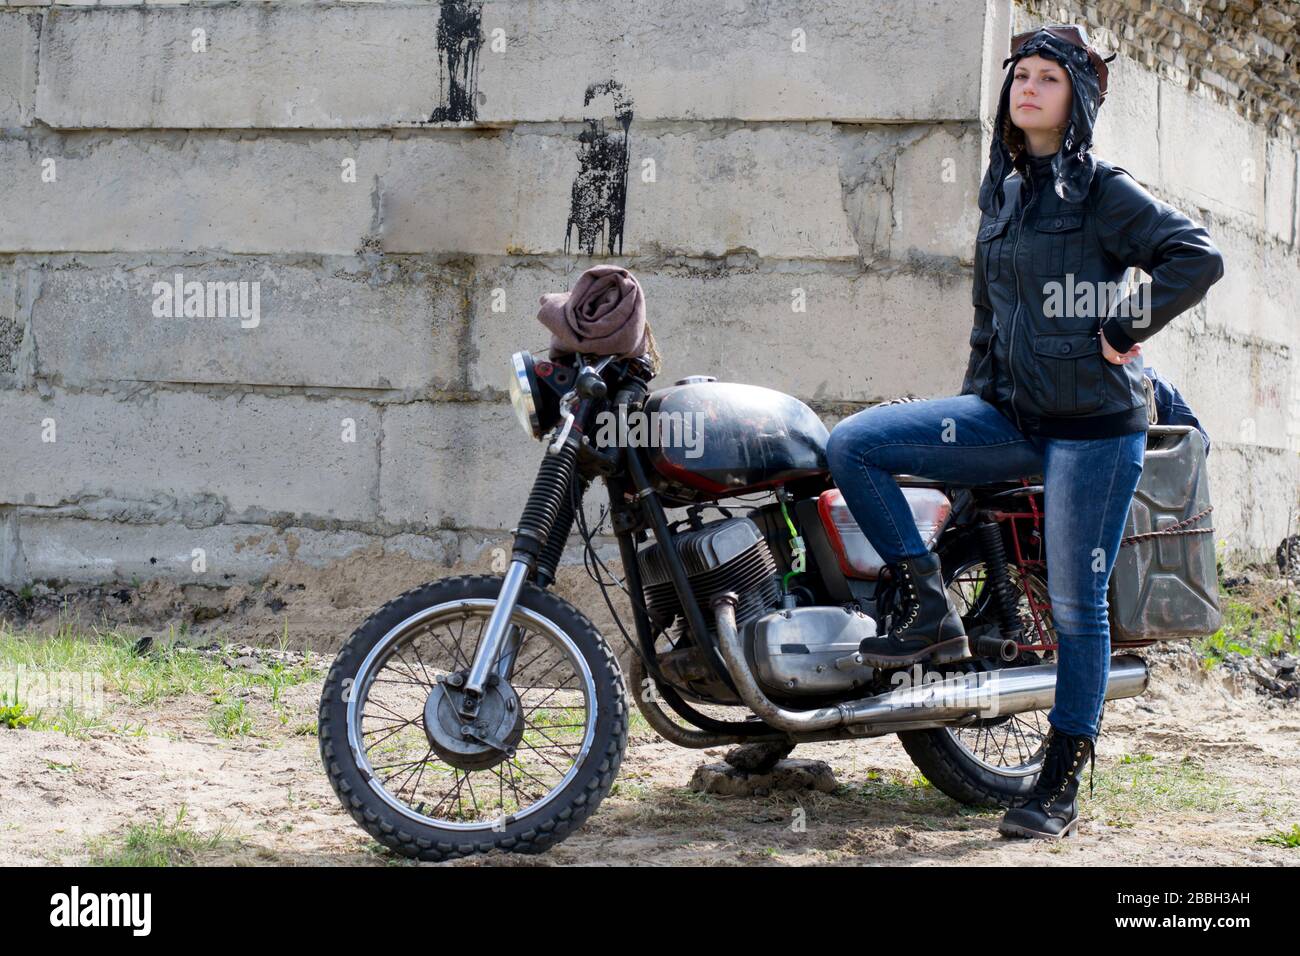 A post apocalyptic woman near motorcycle near destroyed building Stock Photo